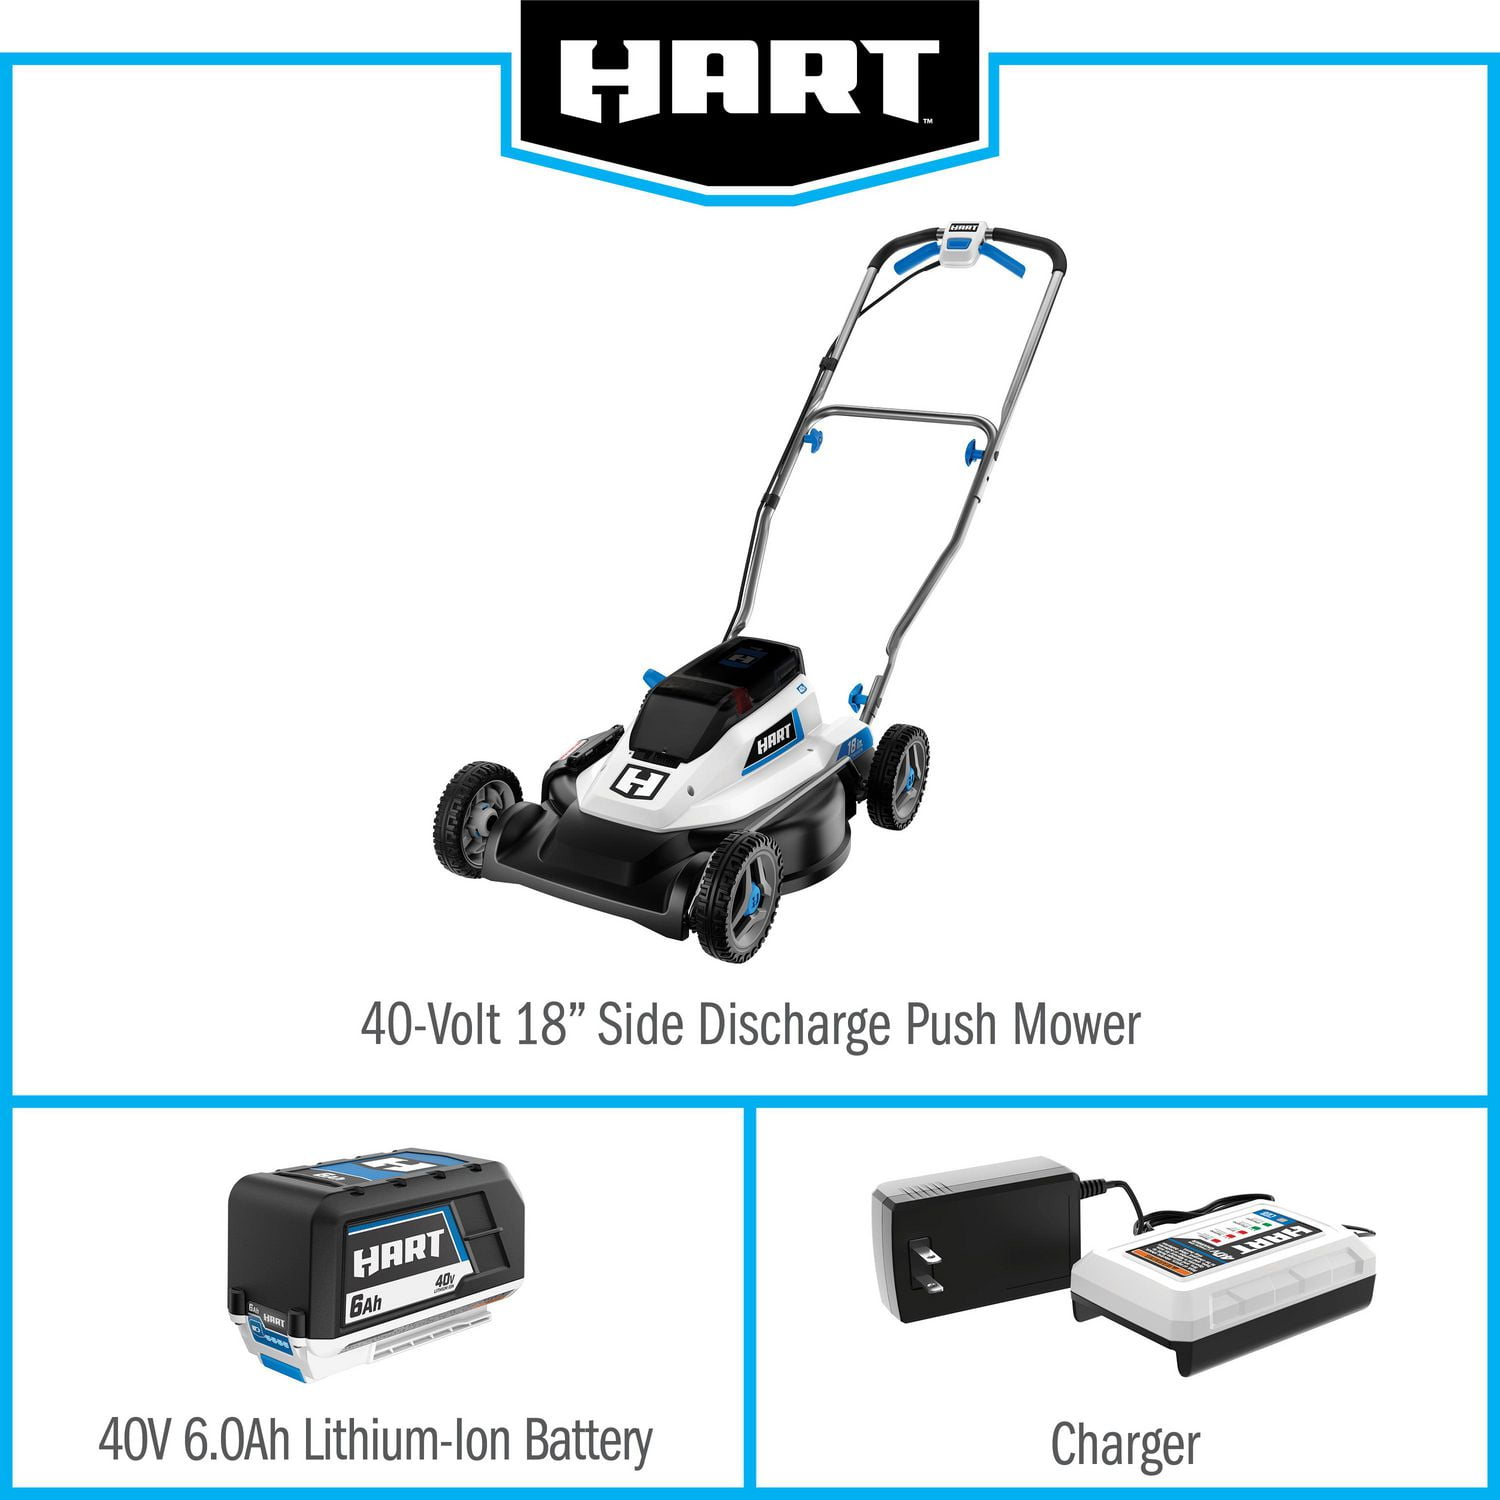 HART 40-Volt Cordless 18-inch Push Mower Kit, (1) 6Ah Lithium-Ion Battery,  (1) Battery Charger, 5-year tool warranty